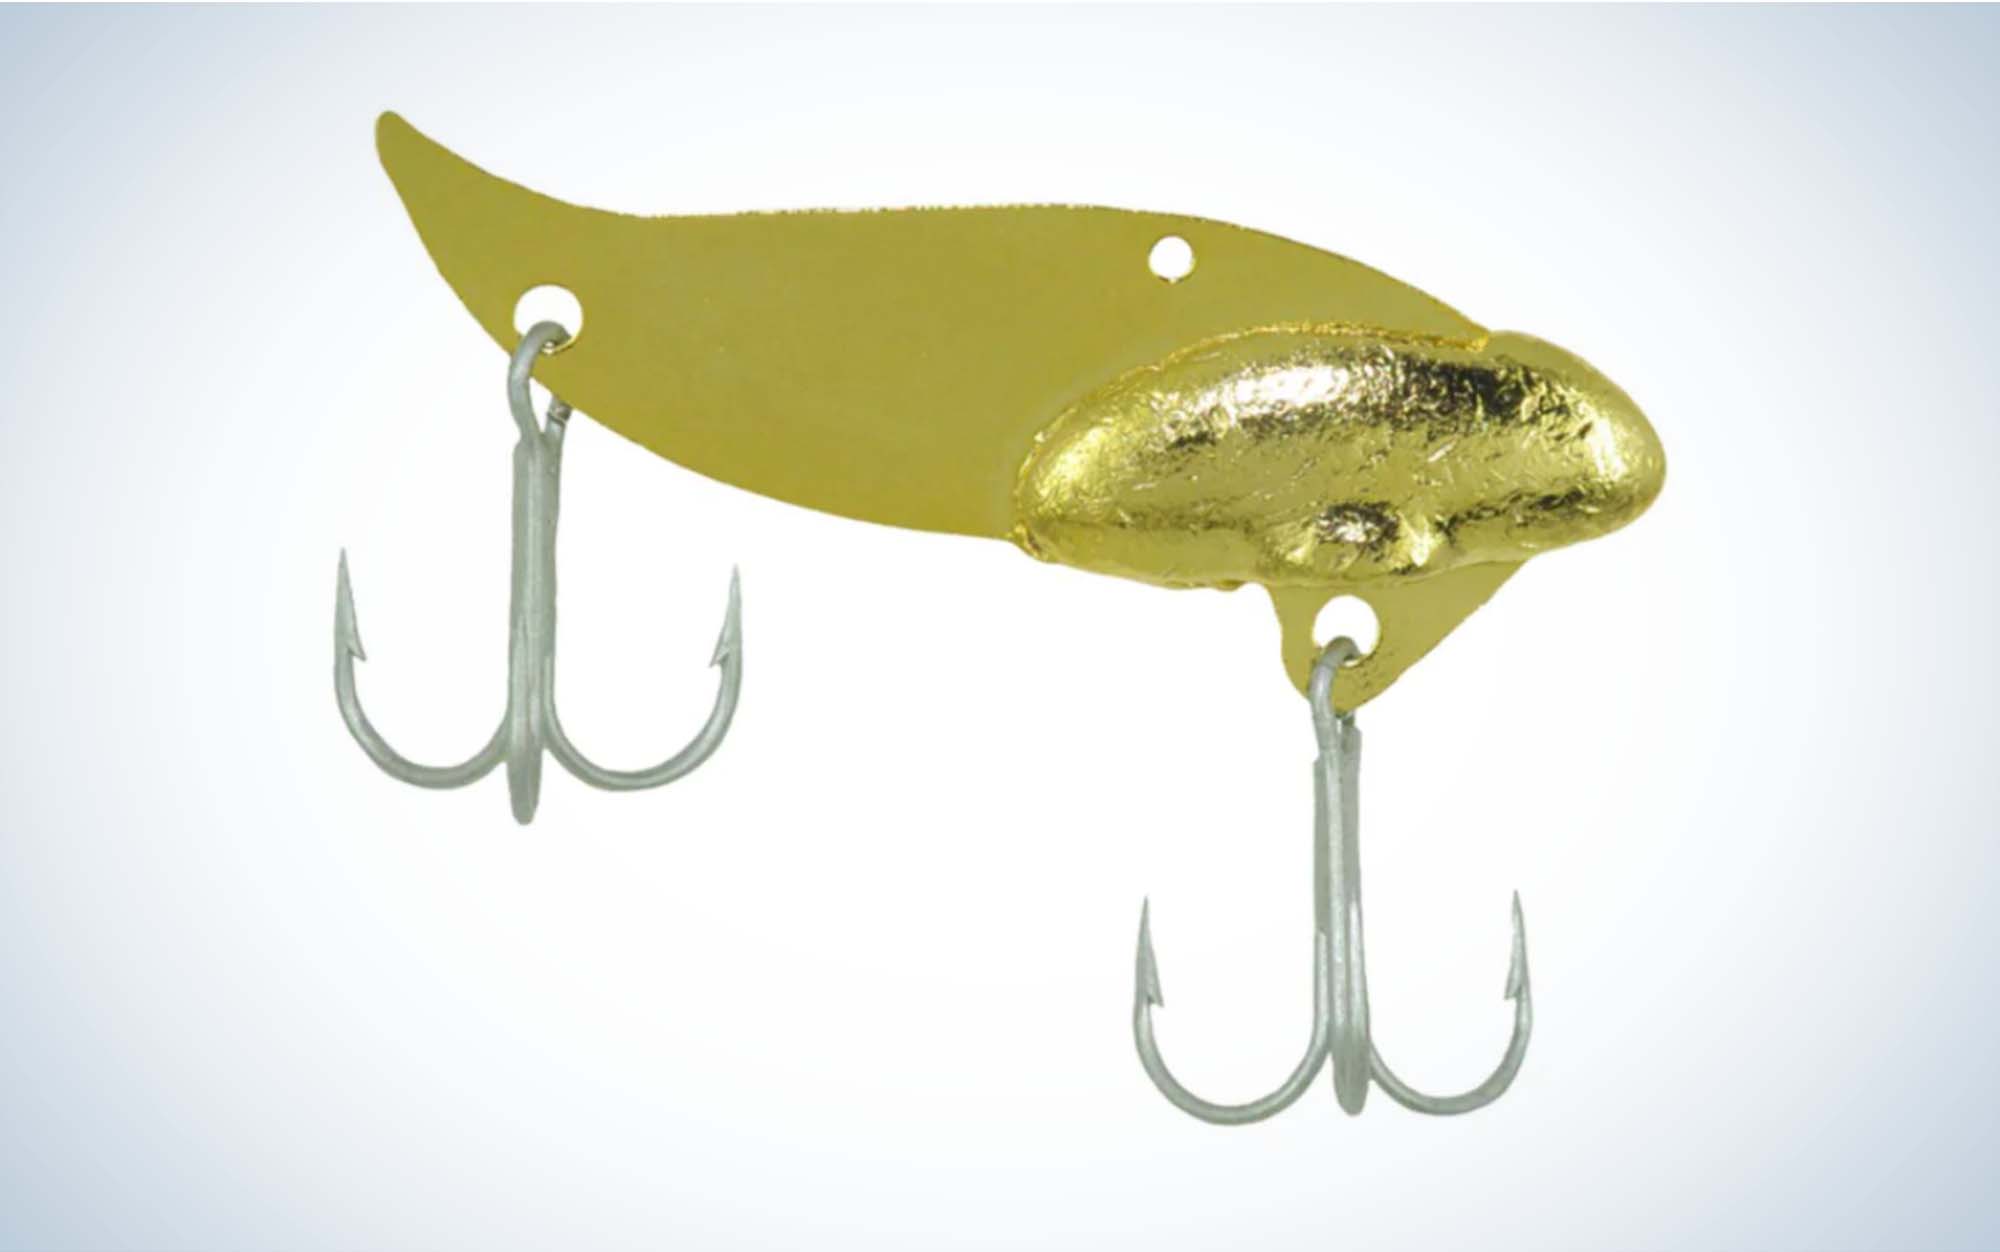 A great winter bass lure for deep water and fish eating shad